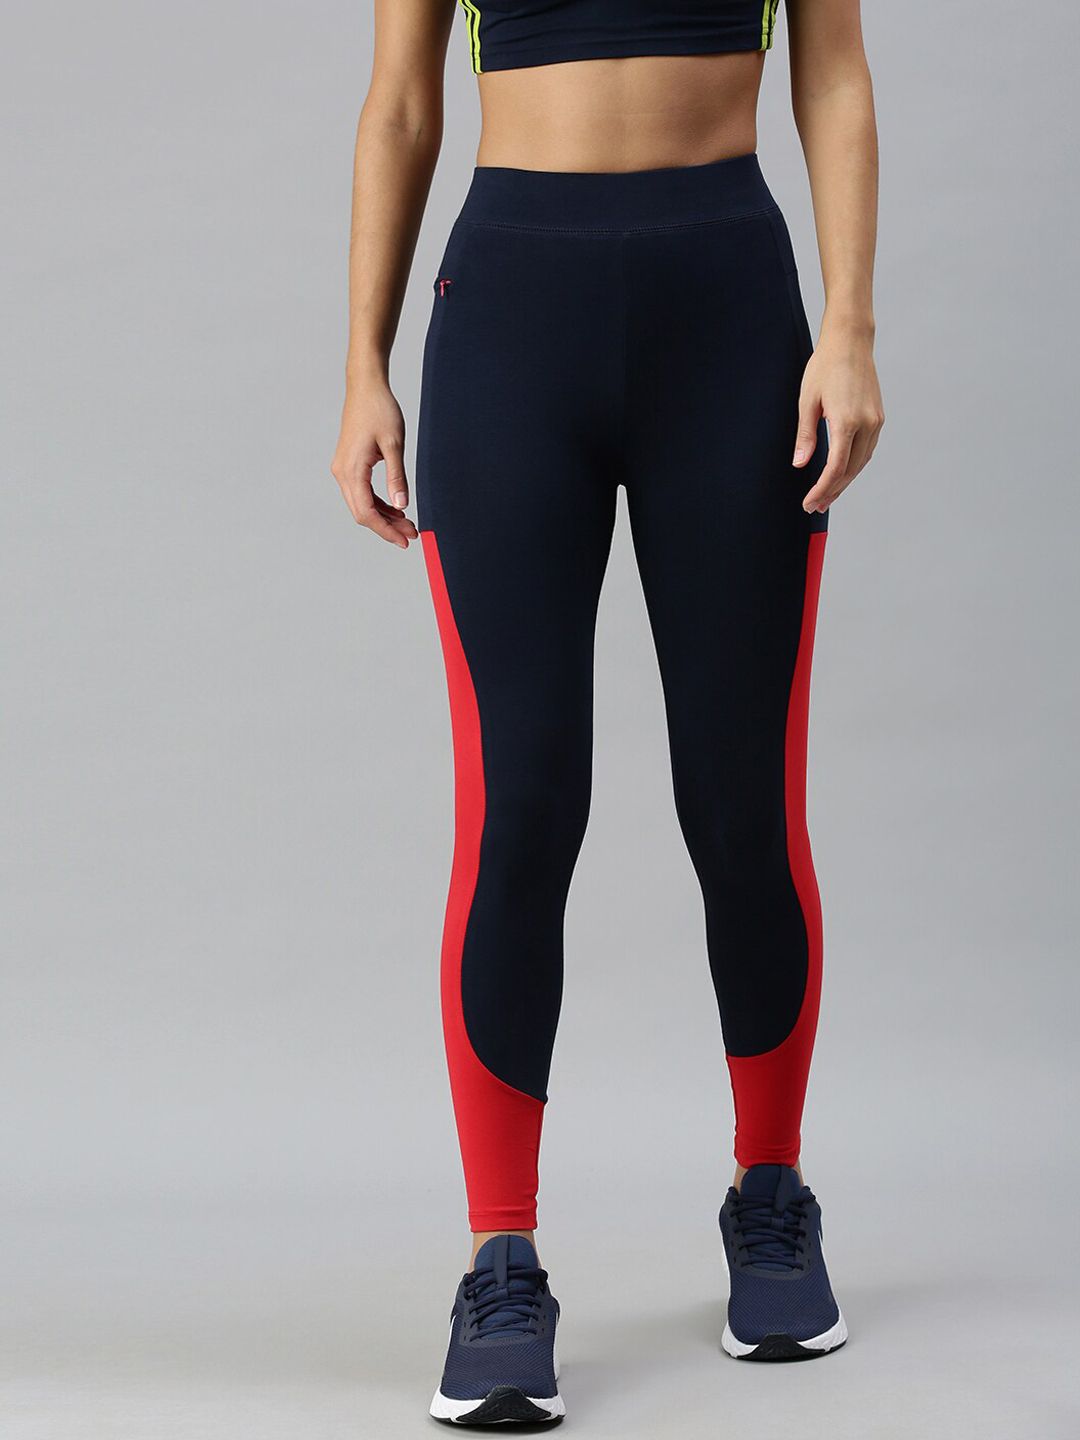 De Moza Women Navy Blue & Red Colourblocked Active Wear Tights Price in India